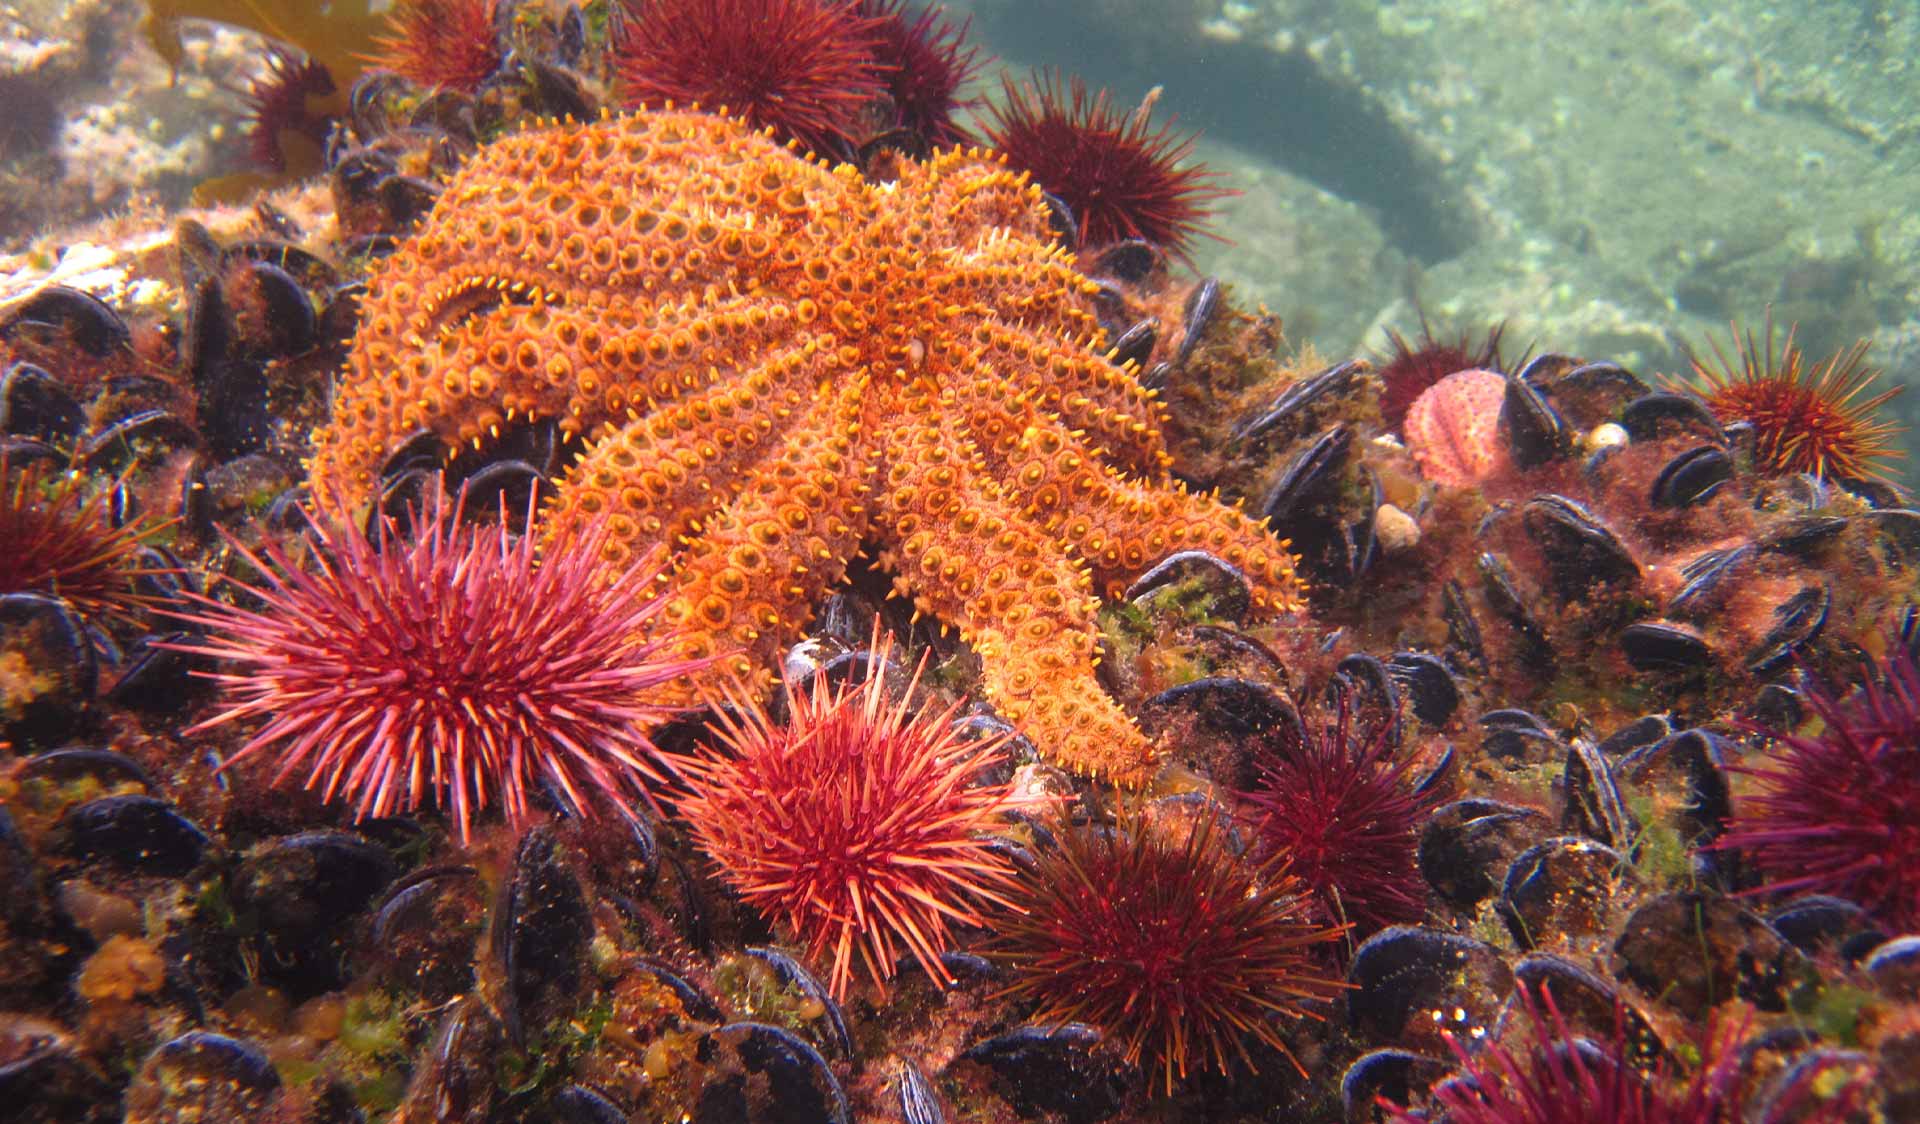 A sea star and urchins on the ocean floor